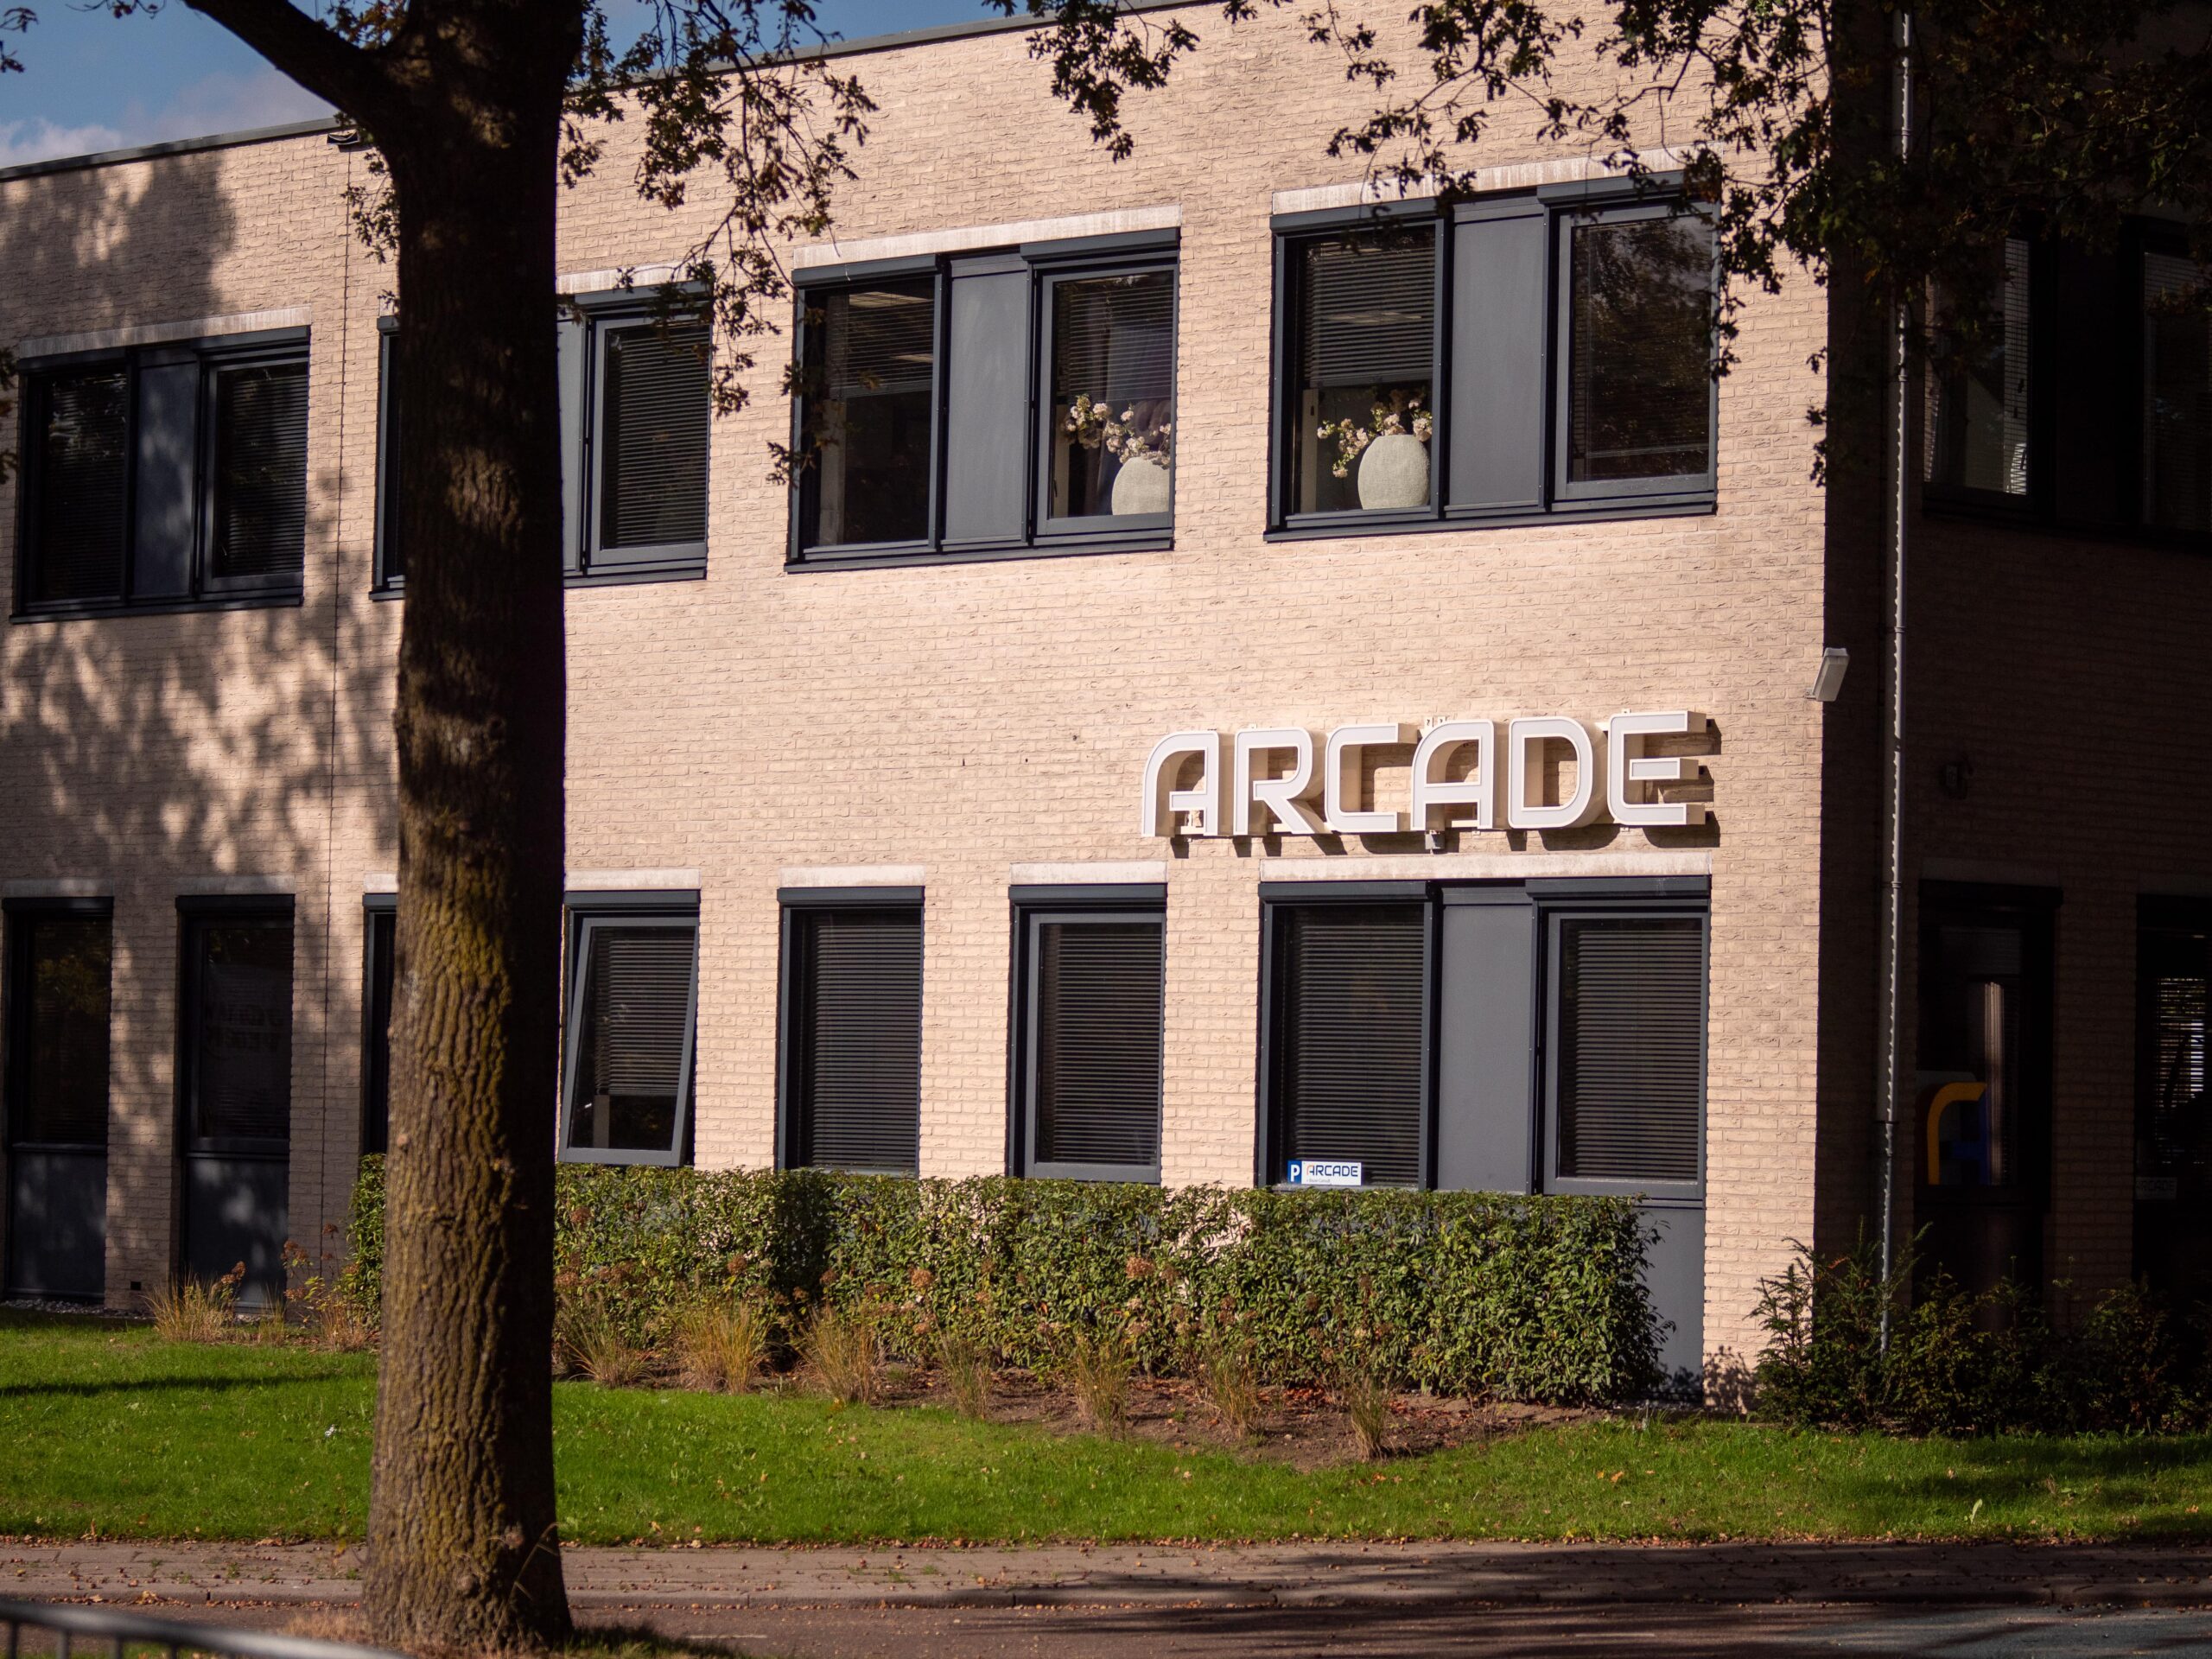 Get in touch - Arcade Bouw Consult